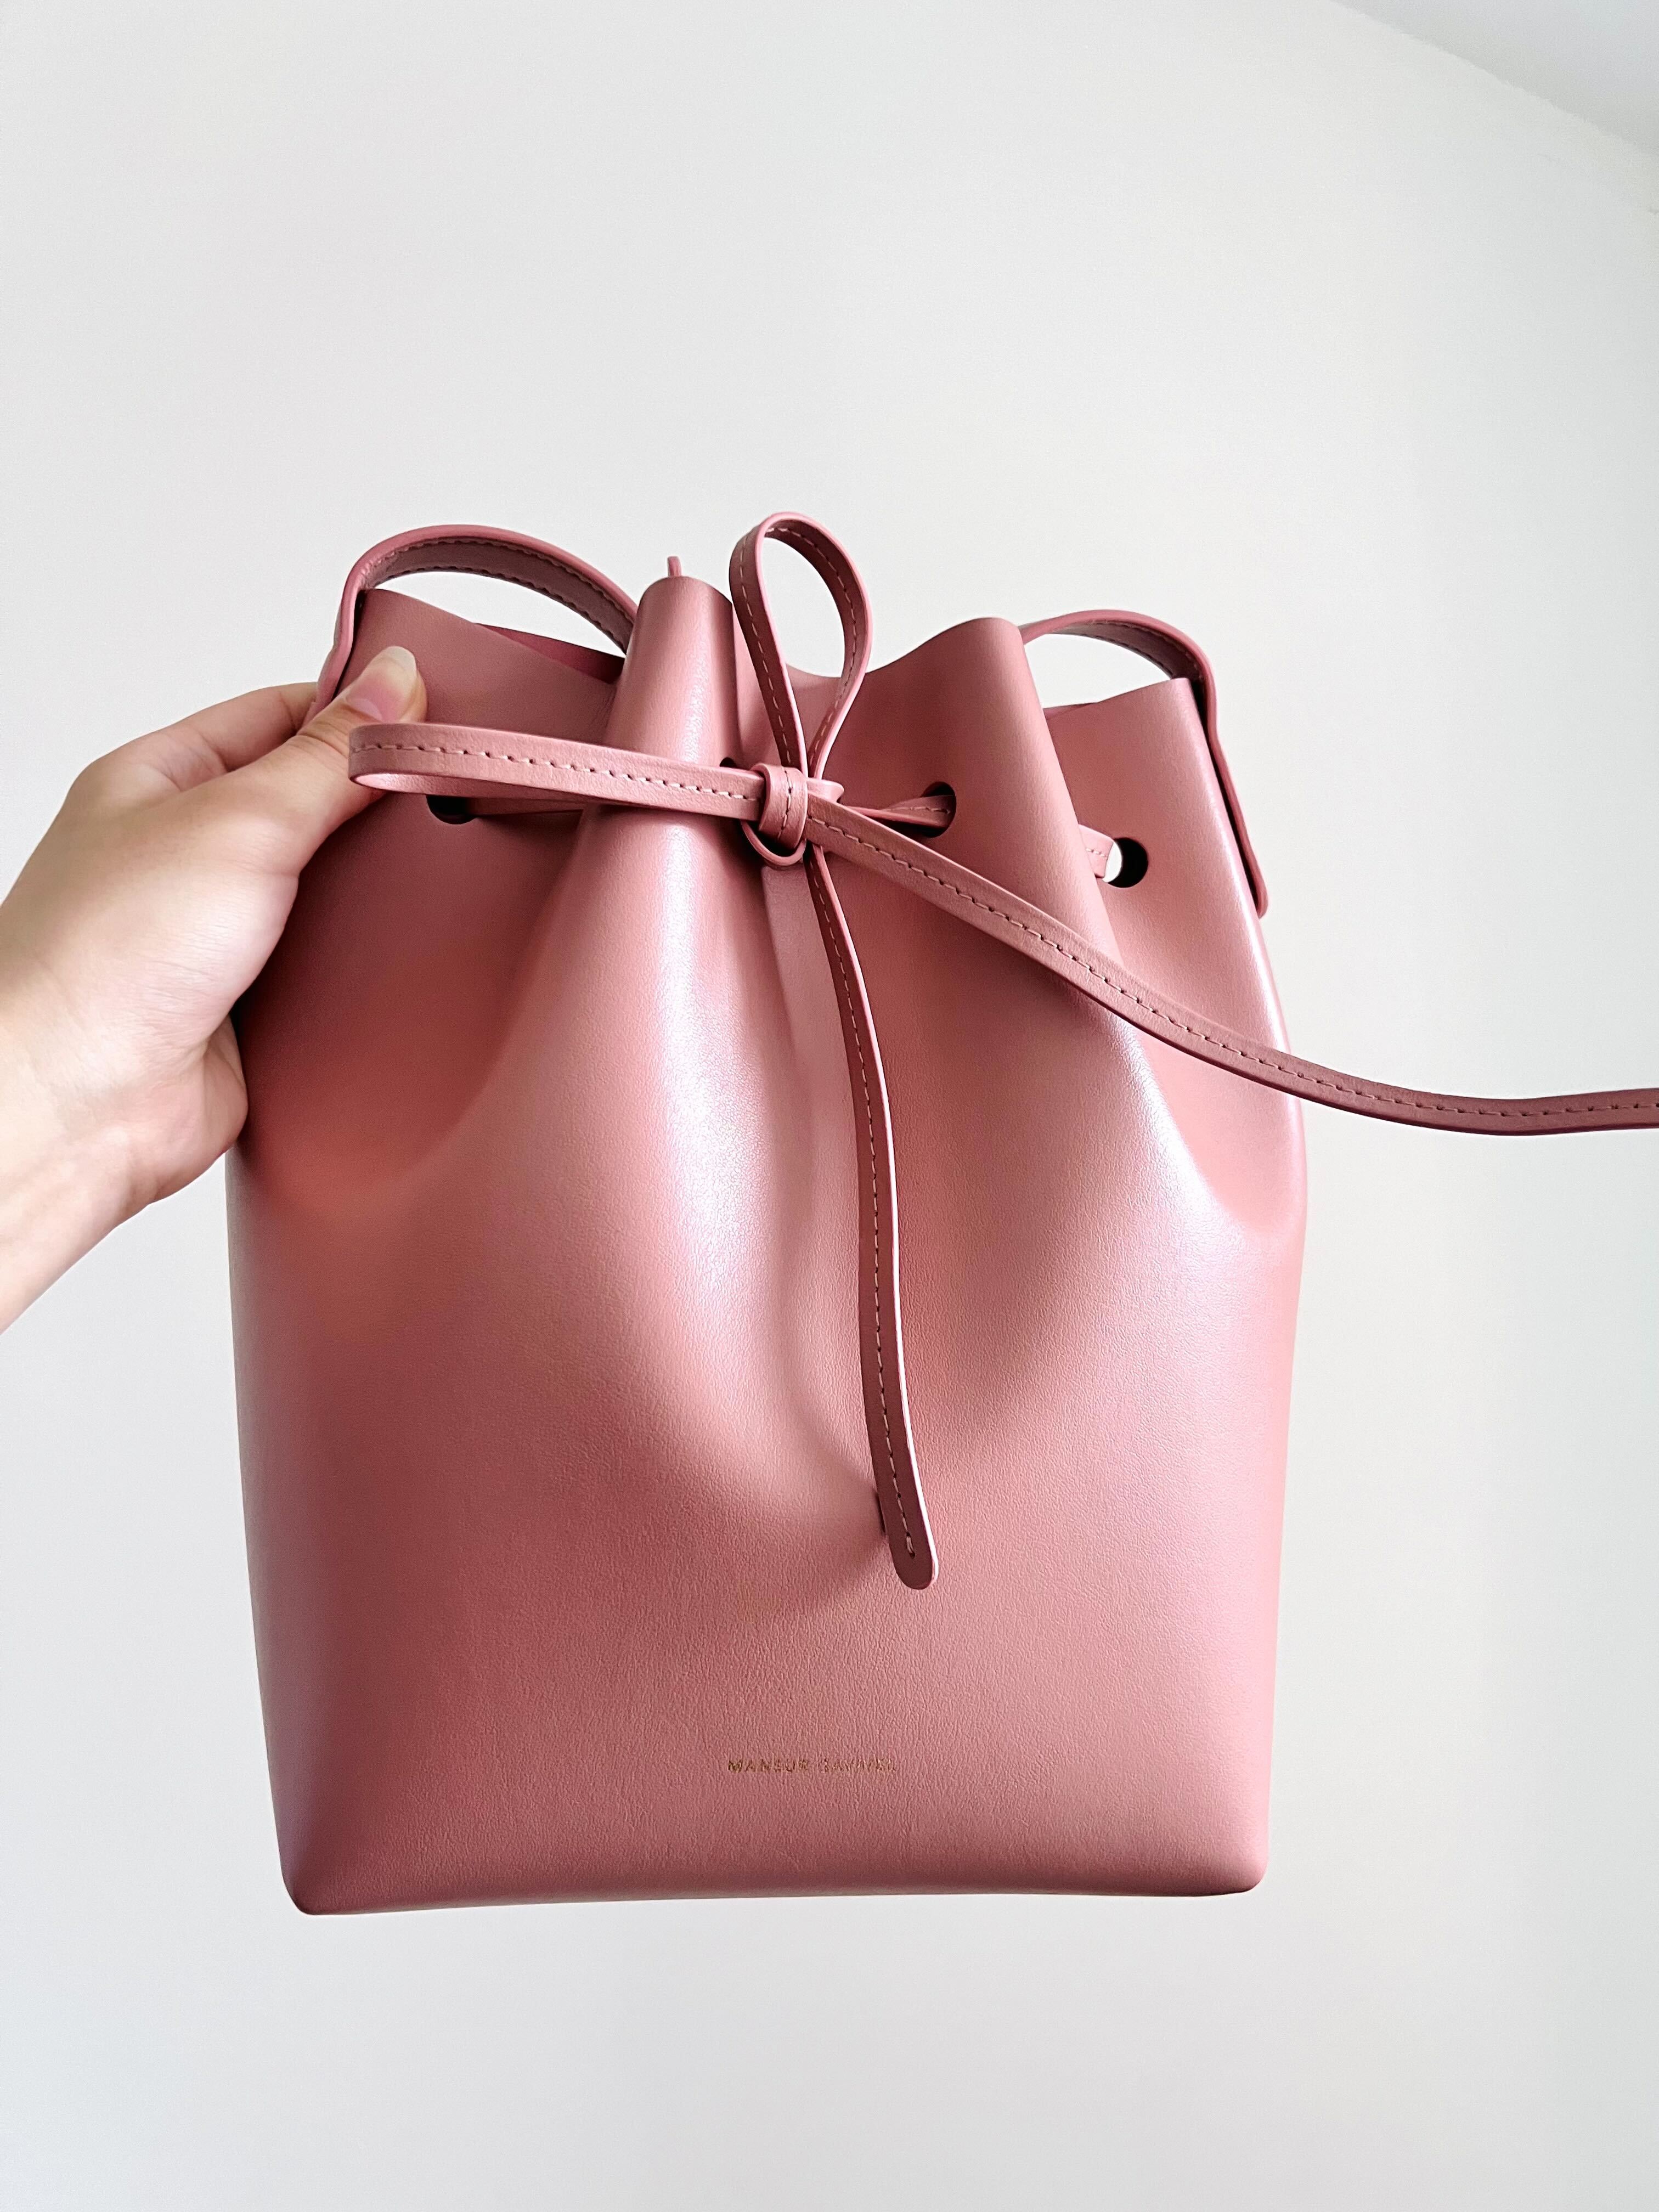 Cause Travel With Kids Is WAR, This Mansur Gavriel Bag Is Your Secret  Weapon. - Babe by Hatch